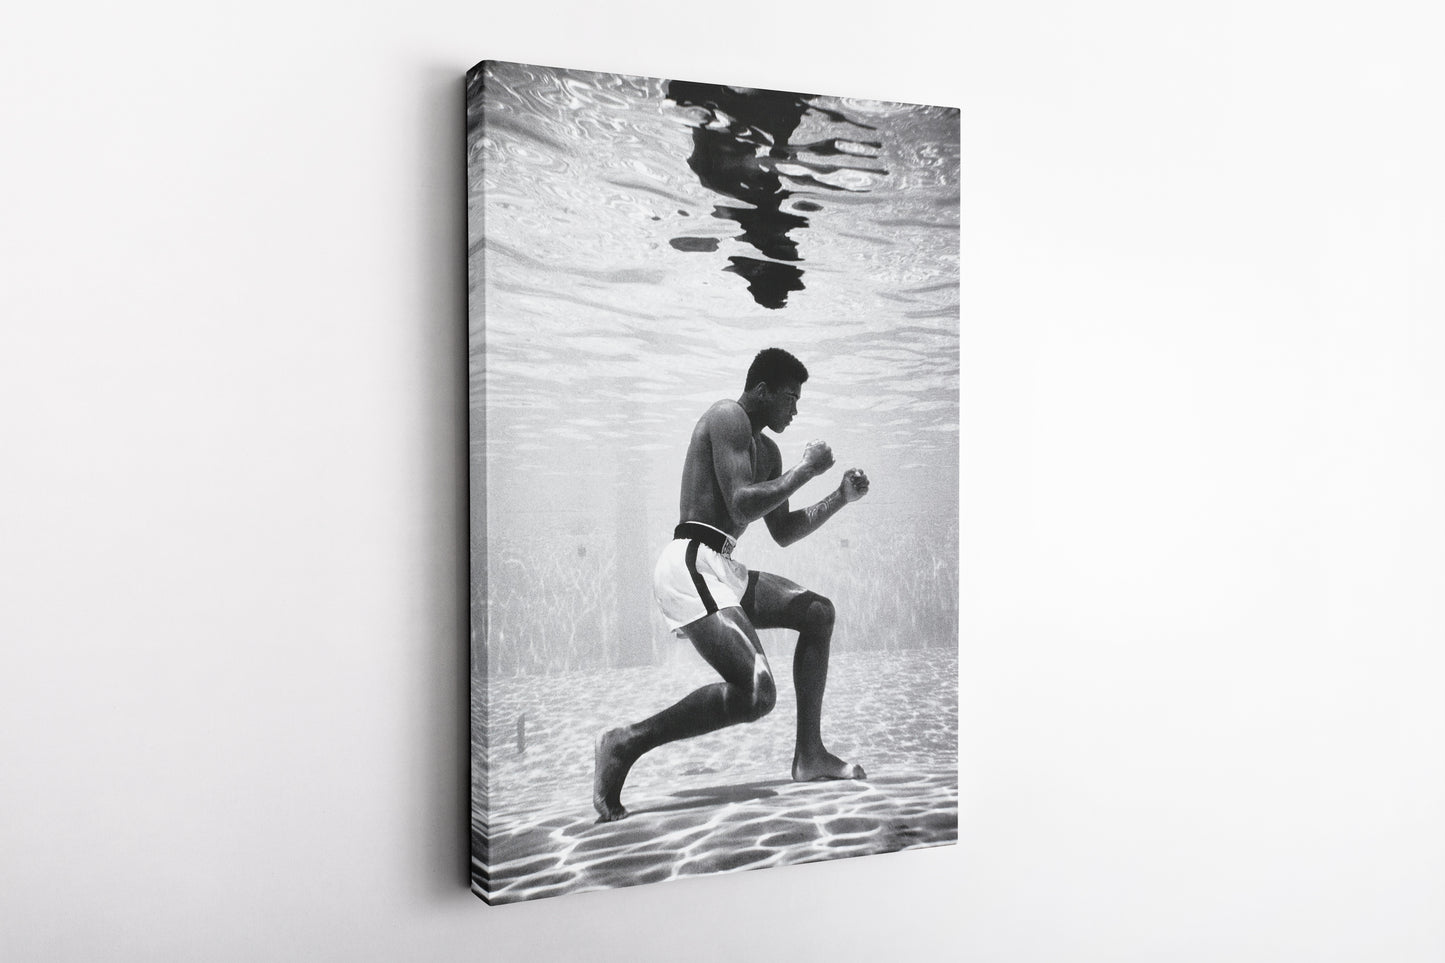 Muhammad Ali Poster Underwater Boxing Black and White Wall Art Home Decor Hand Made Canvas Print